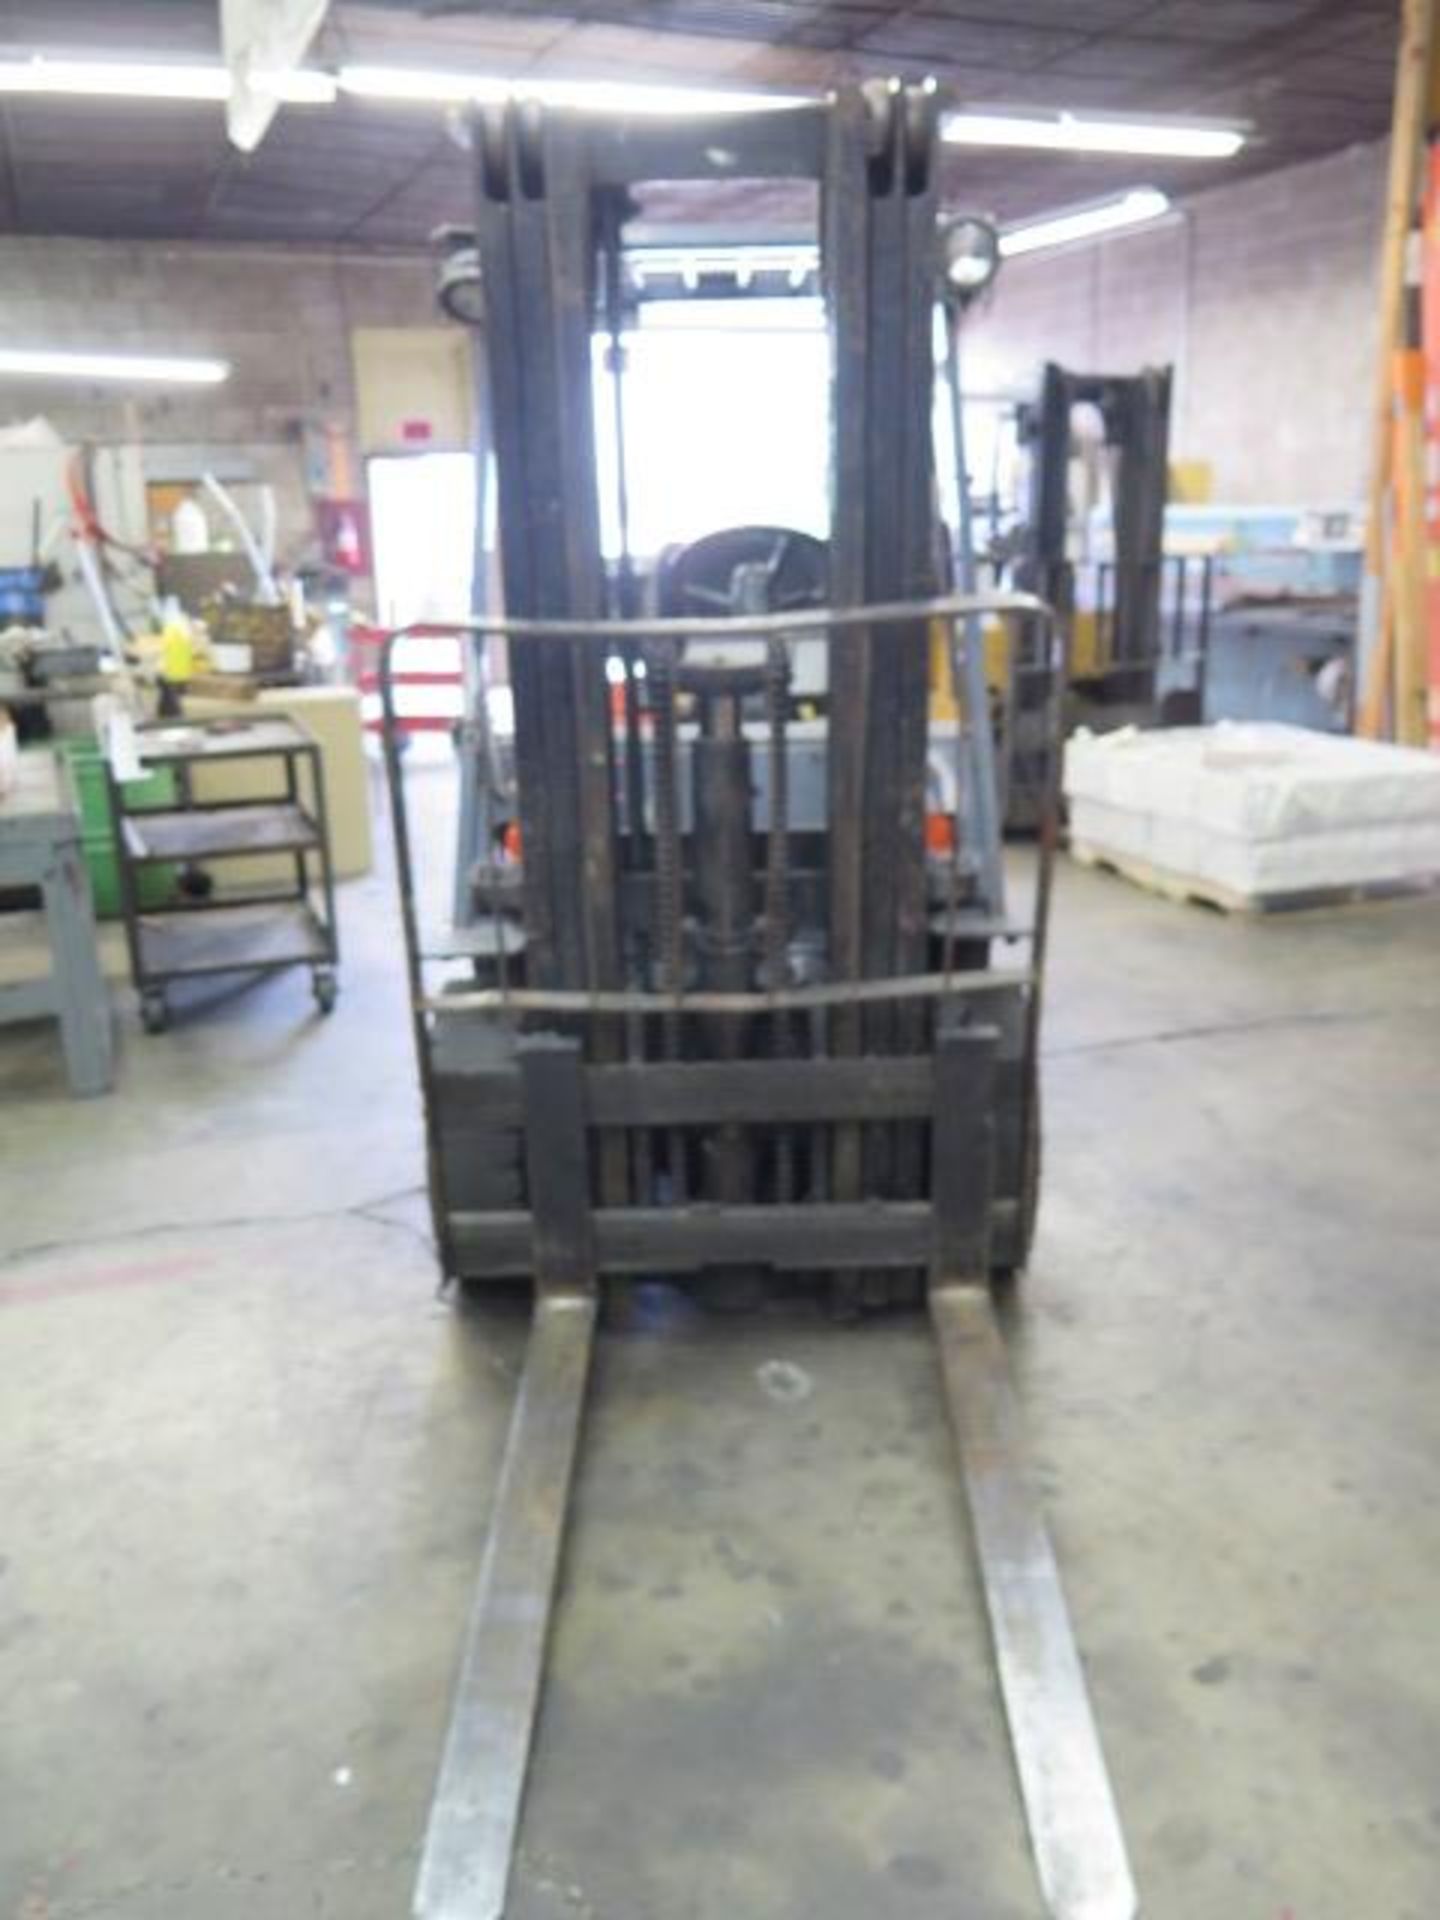 Toyota 42-5FGC25 4000 Lb LPG Forklift s/n 79062 w/ 3-Stage, 185" Lift Height, Solid Tires,SOLD AS IS - Image 4 of 11